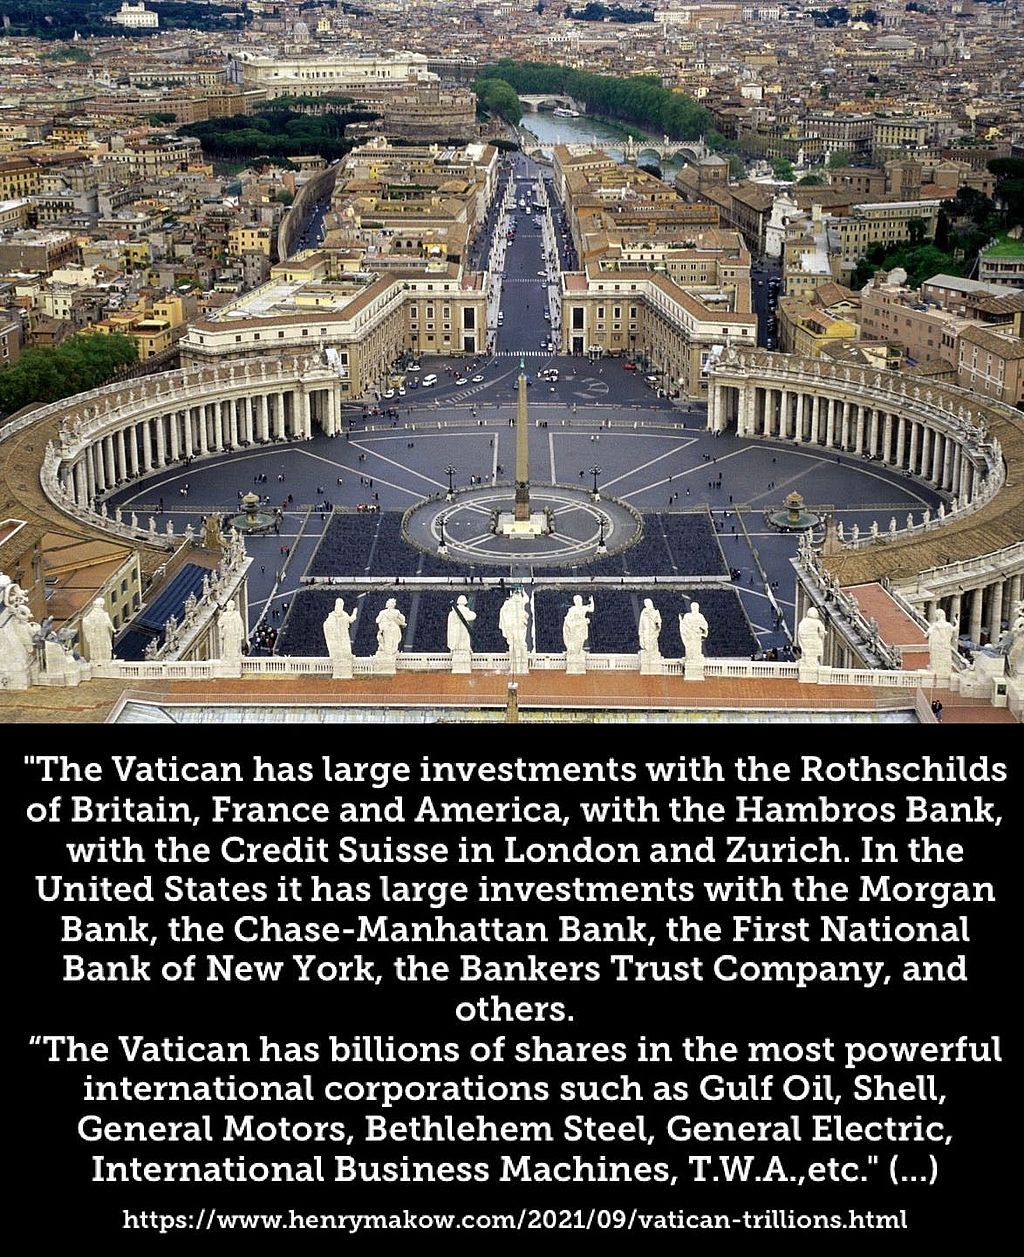 The Rothschilds took over the entire financial operations of the Catholic Church in 1823